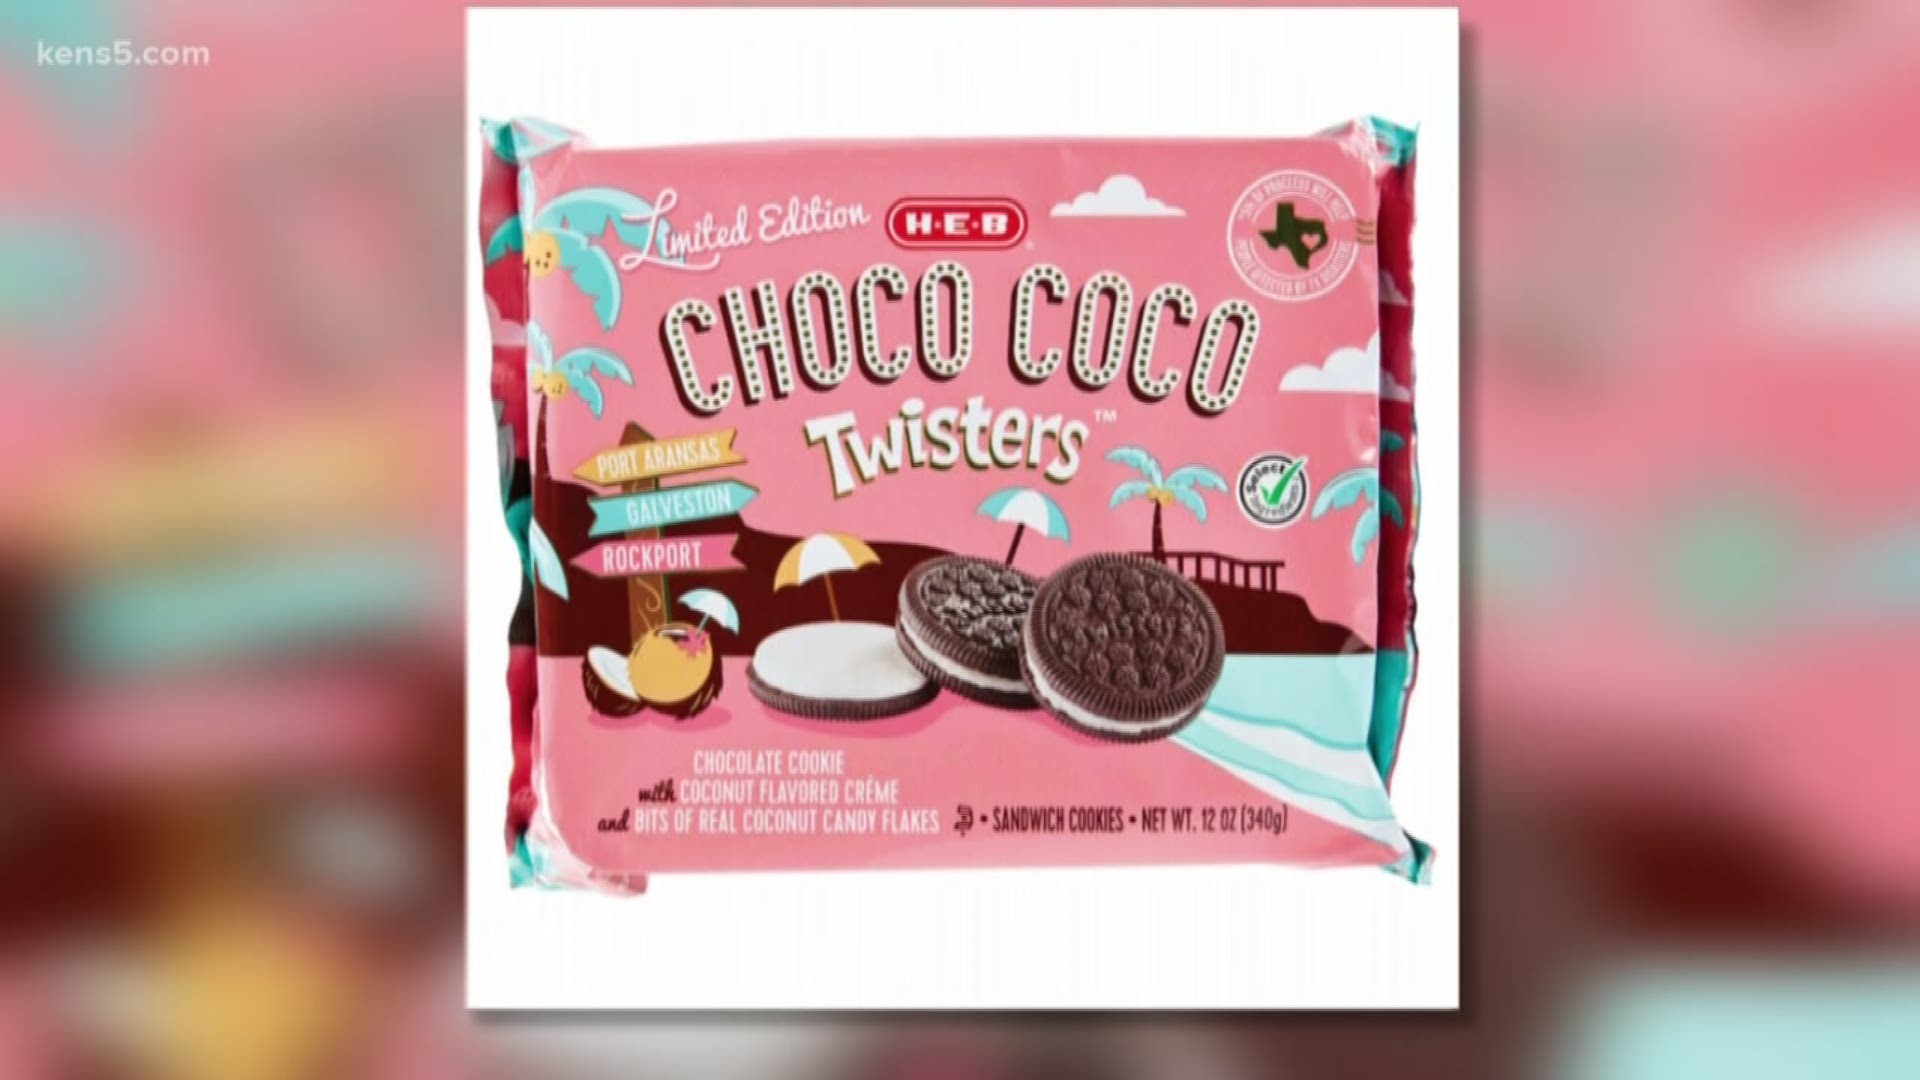 Proceeds from Choco Coco Twisters will be donated directly to the American Red Cross, H-E-B said.